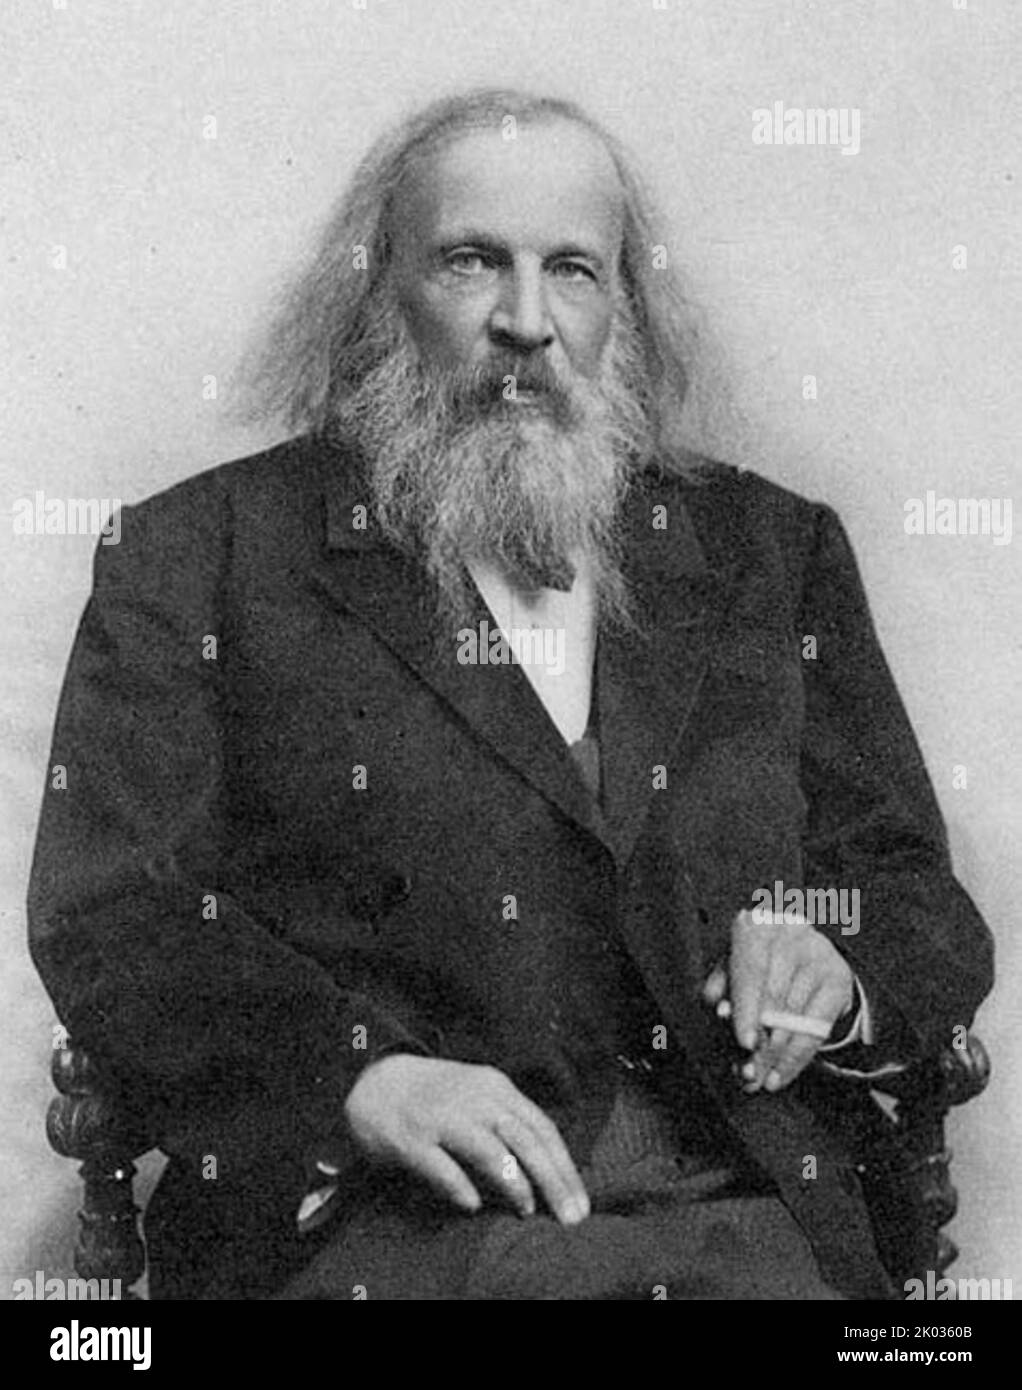 Dmitri Ivanovich Mendeleev (1834 - 1907) Russian chemist and inventor. He is best remembered for formulating the Periodic Law and creating a farsighted version of the periodic table of elements. Stock Photo